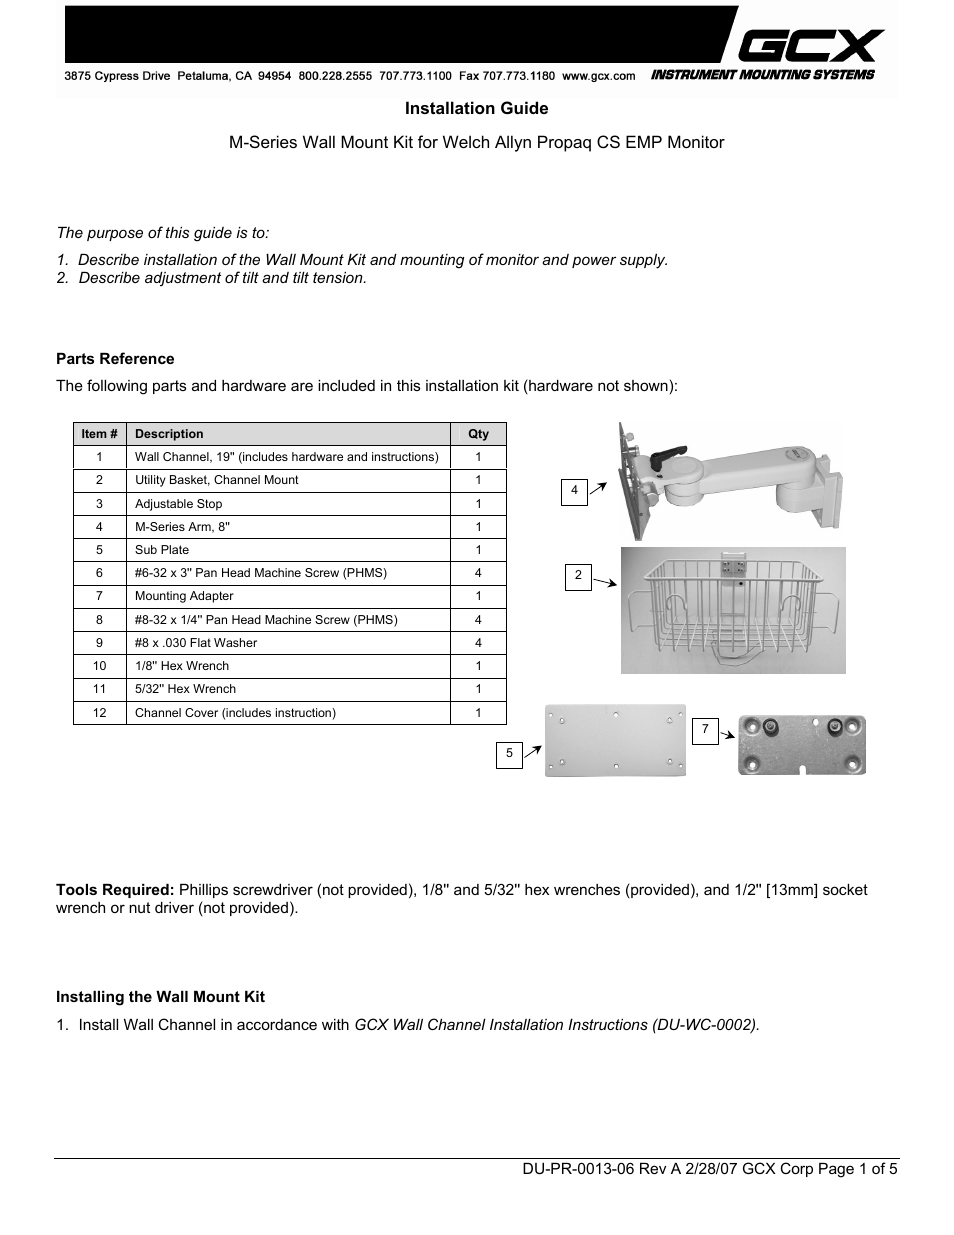 GCX M-Series Wall Mount Kit for Welch Allyn Propaq CS Monitor - Installation Guide